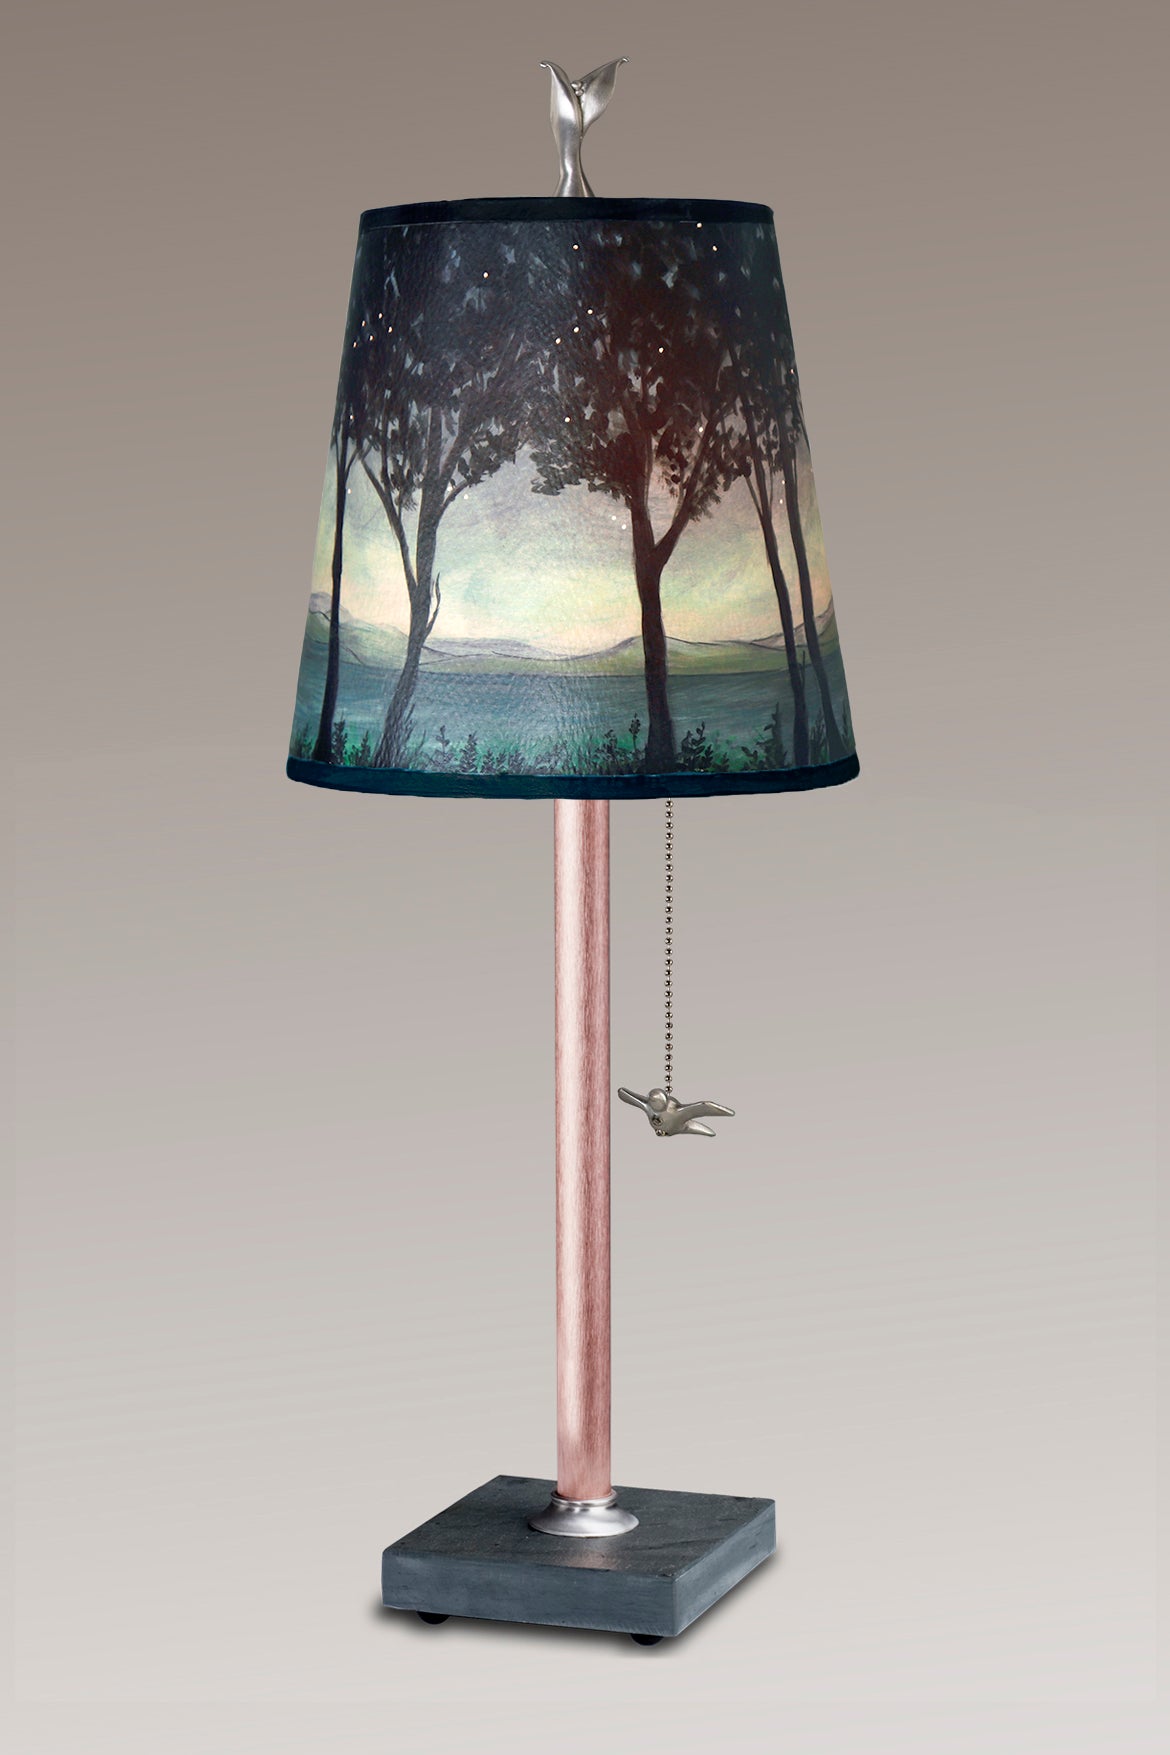 Copper Table Lamp with Small Drum in Twilight